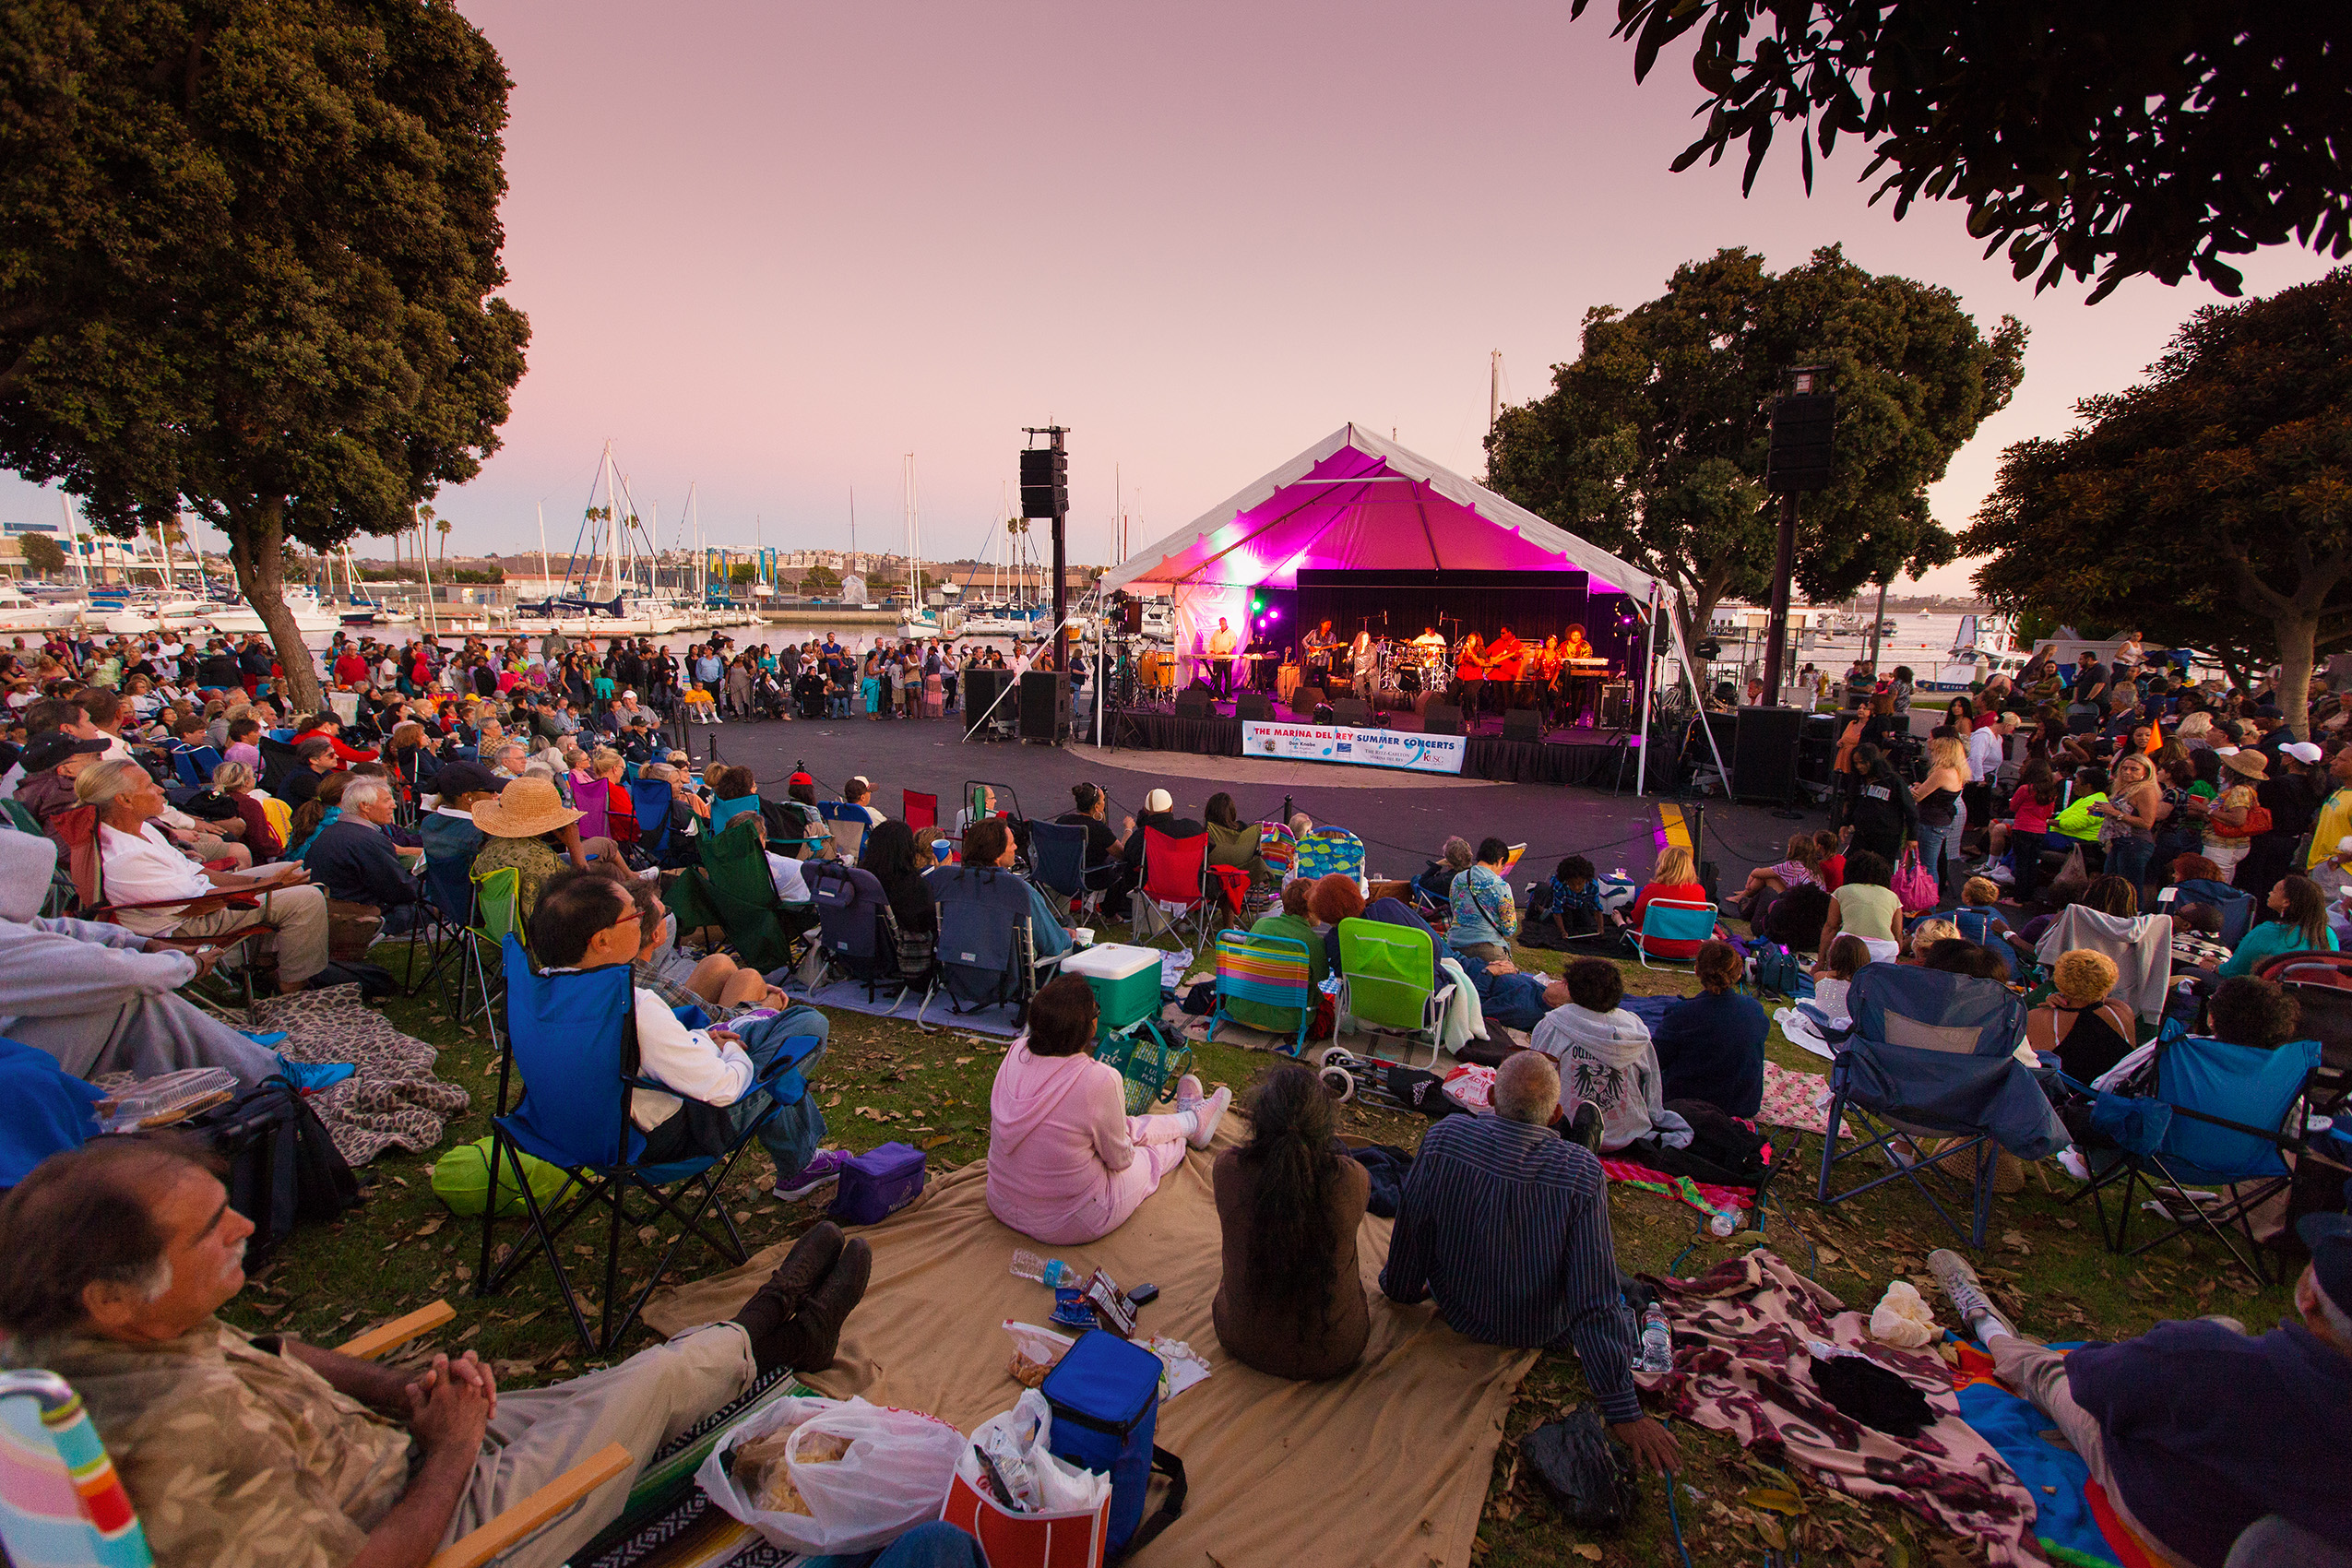 Annual events like the free Summer Concert Series at Burton Chace Park make Marina del Rey a top destination for regional visitors.